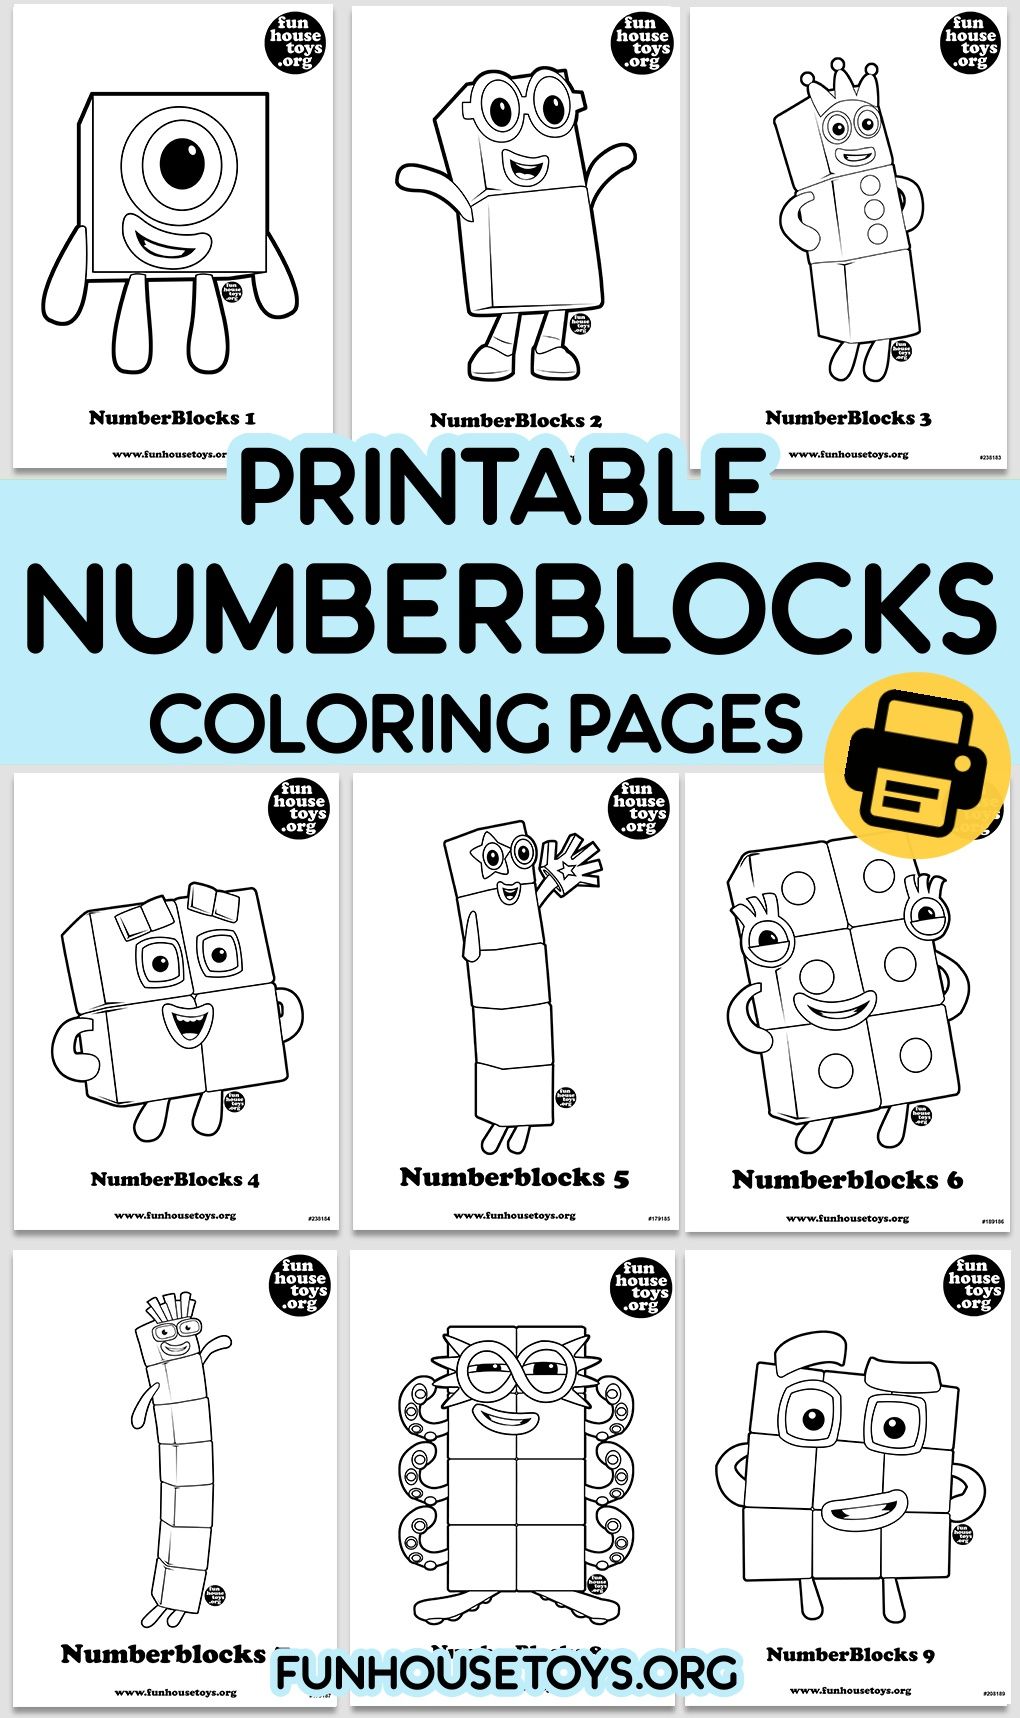 Numberblocks coloring pages for kids fun printables for kids learning worksheets kids learning